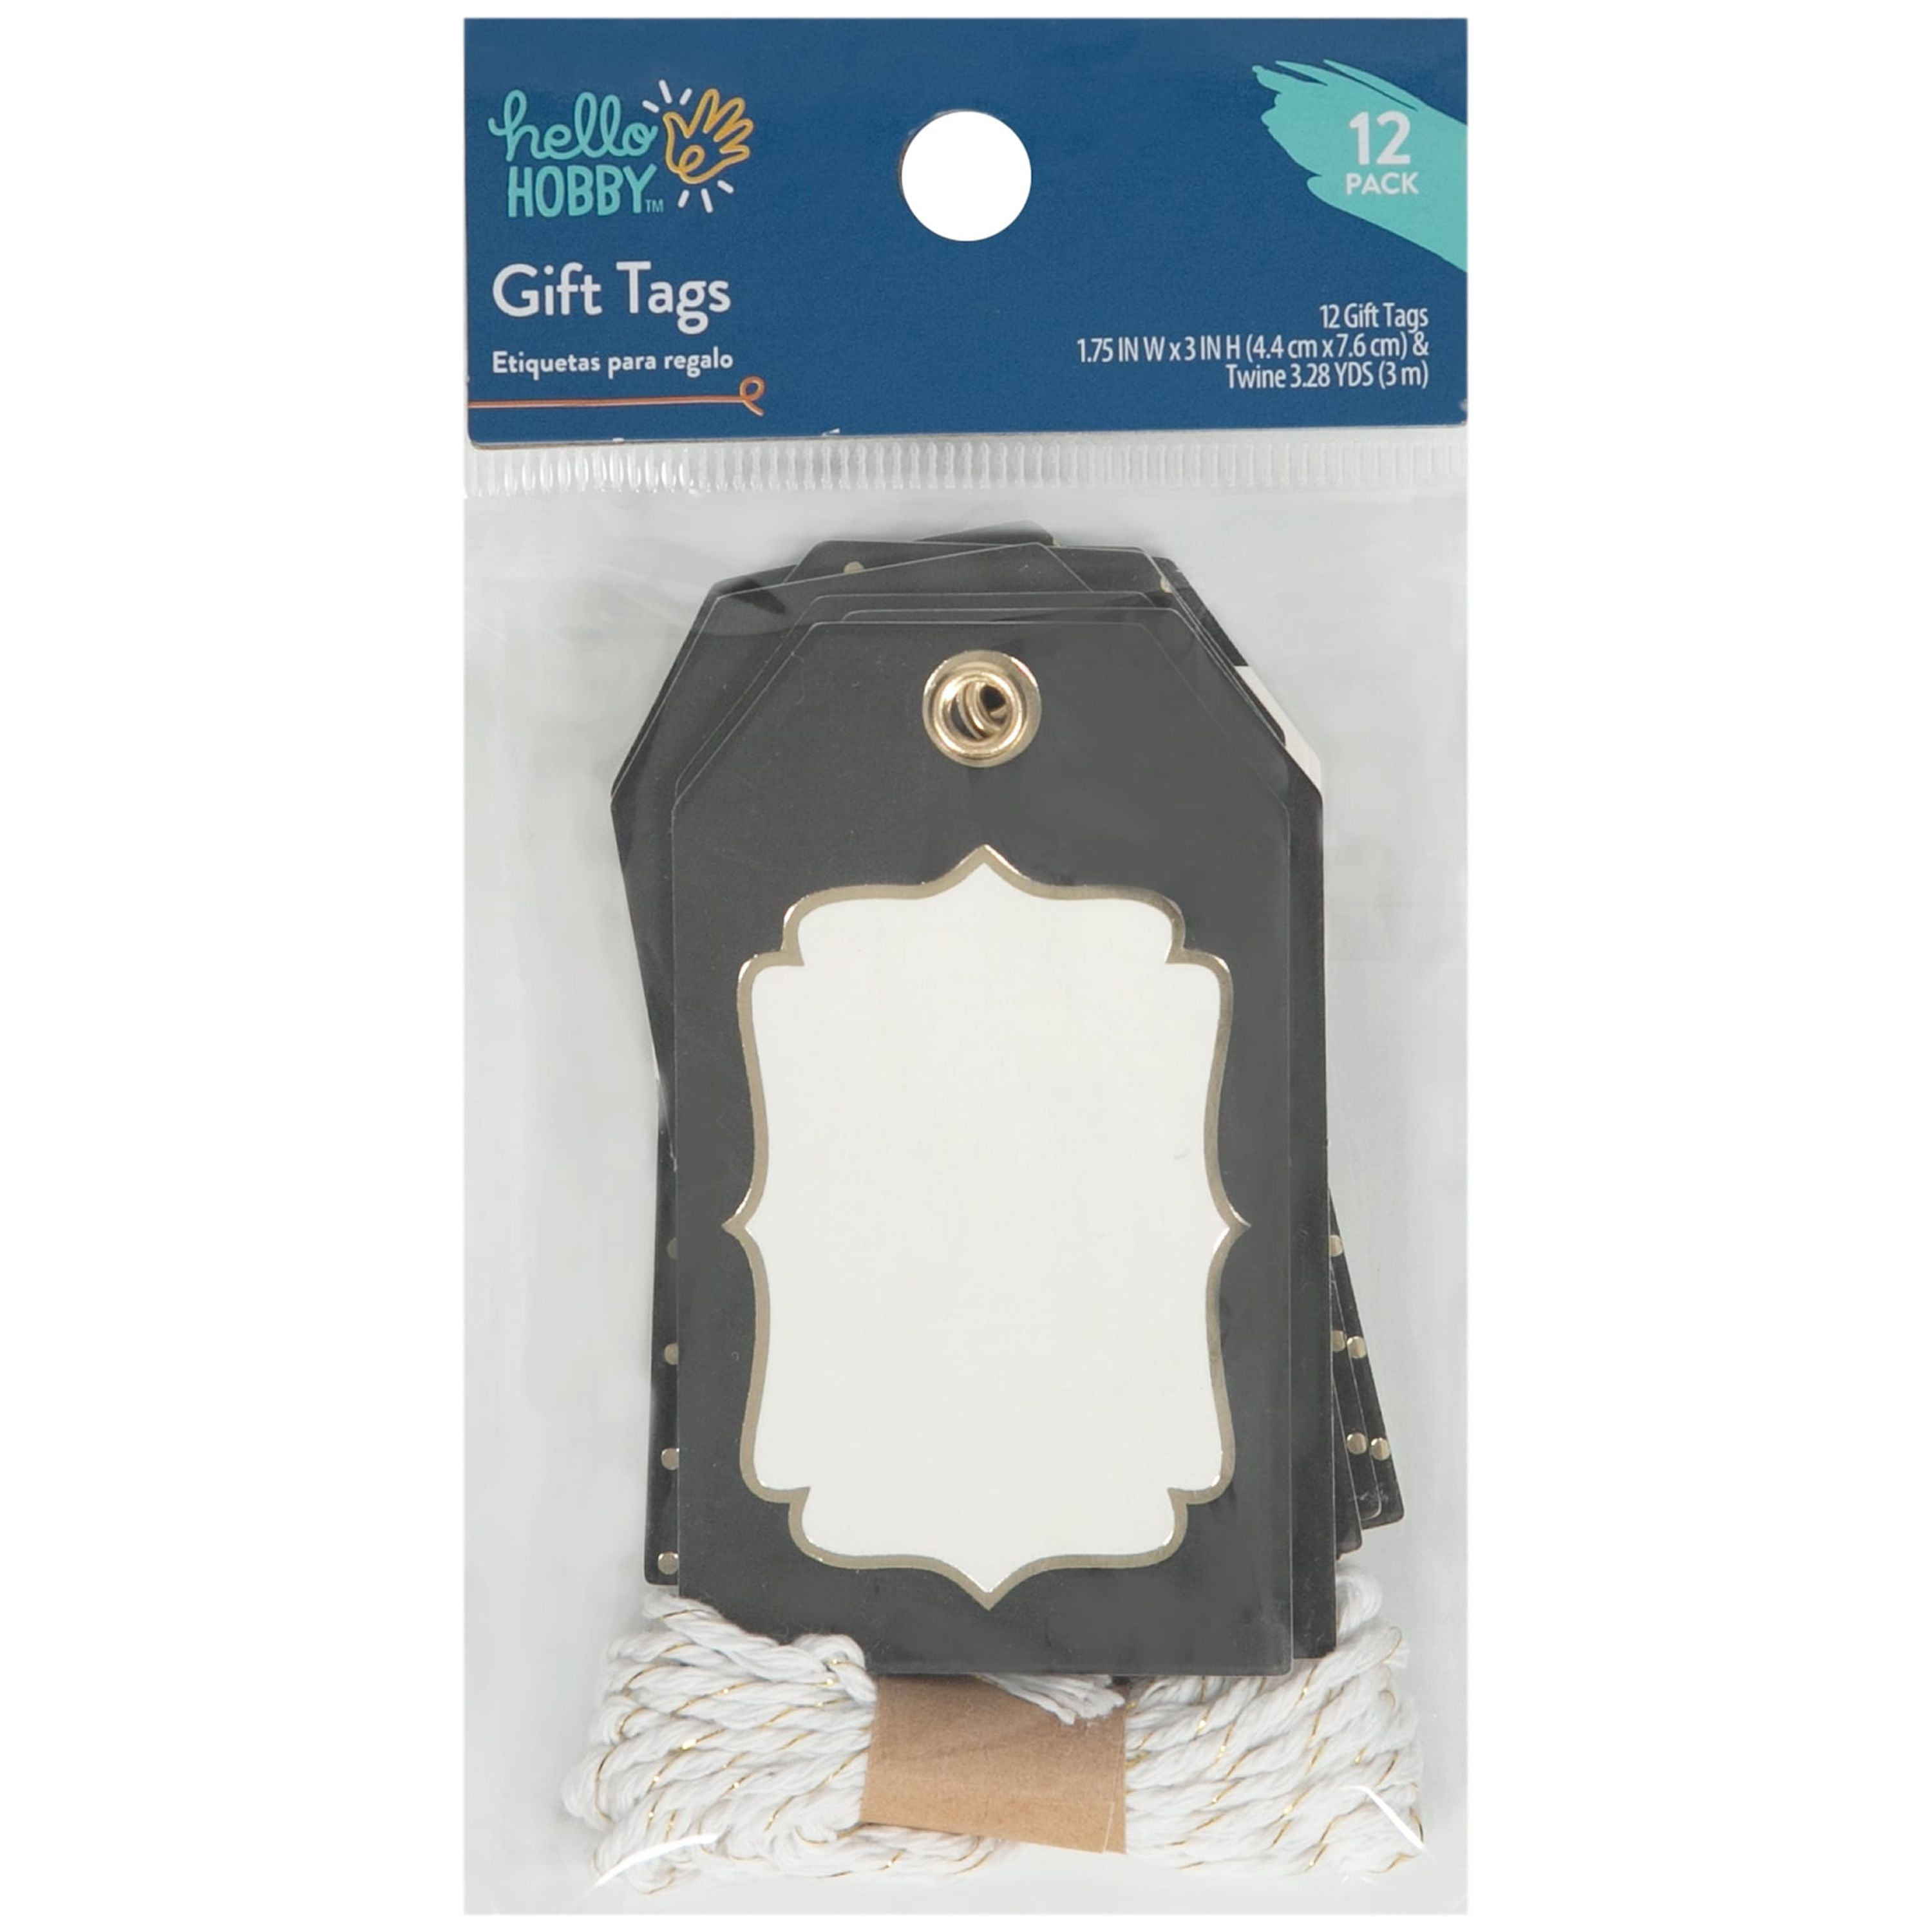 50 Pack - CleverDelights White Plastic Tags - 4.75 x 2.375 - Tear-Proof  and Waterproof